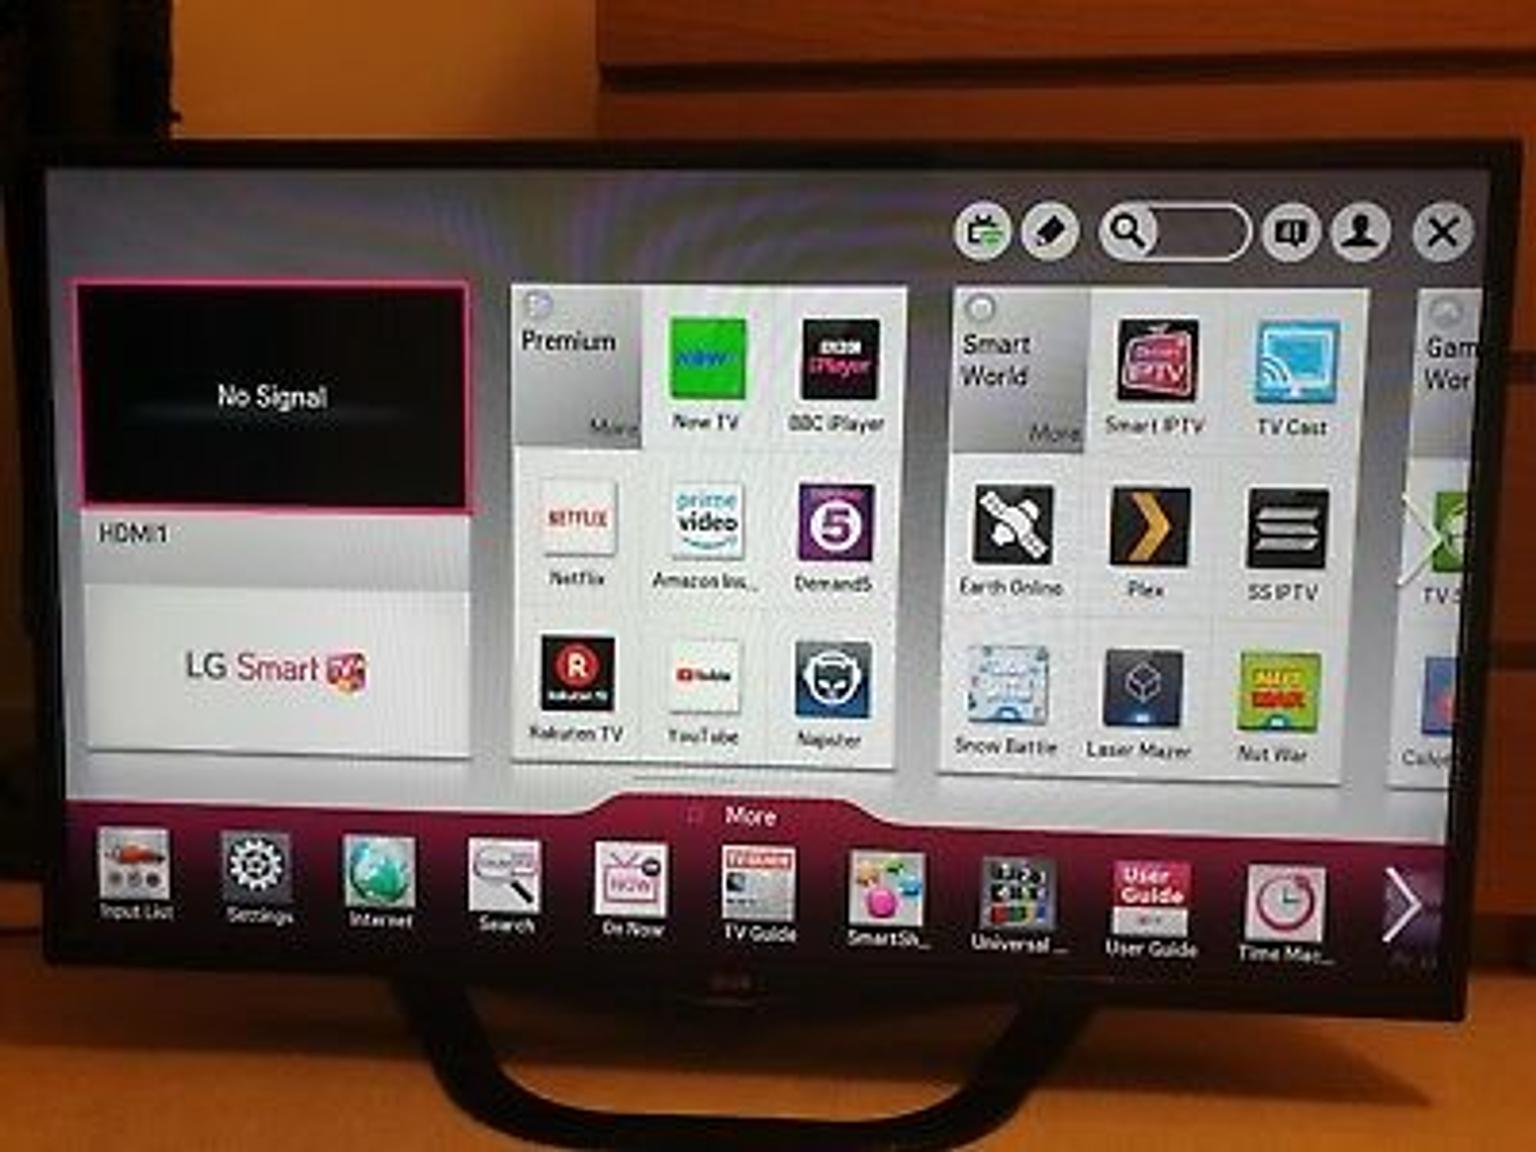 42" LG SMART LED TV in L5 Liverpool for £120.00 for sale ...